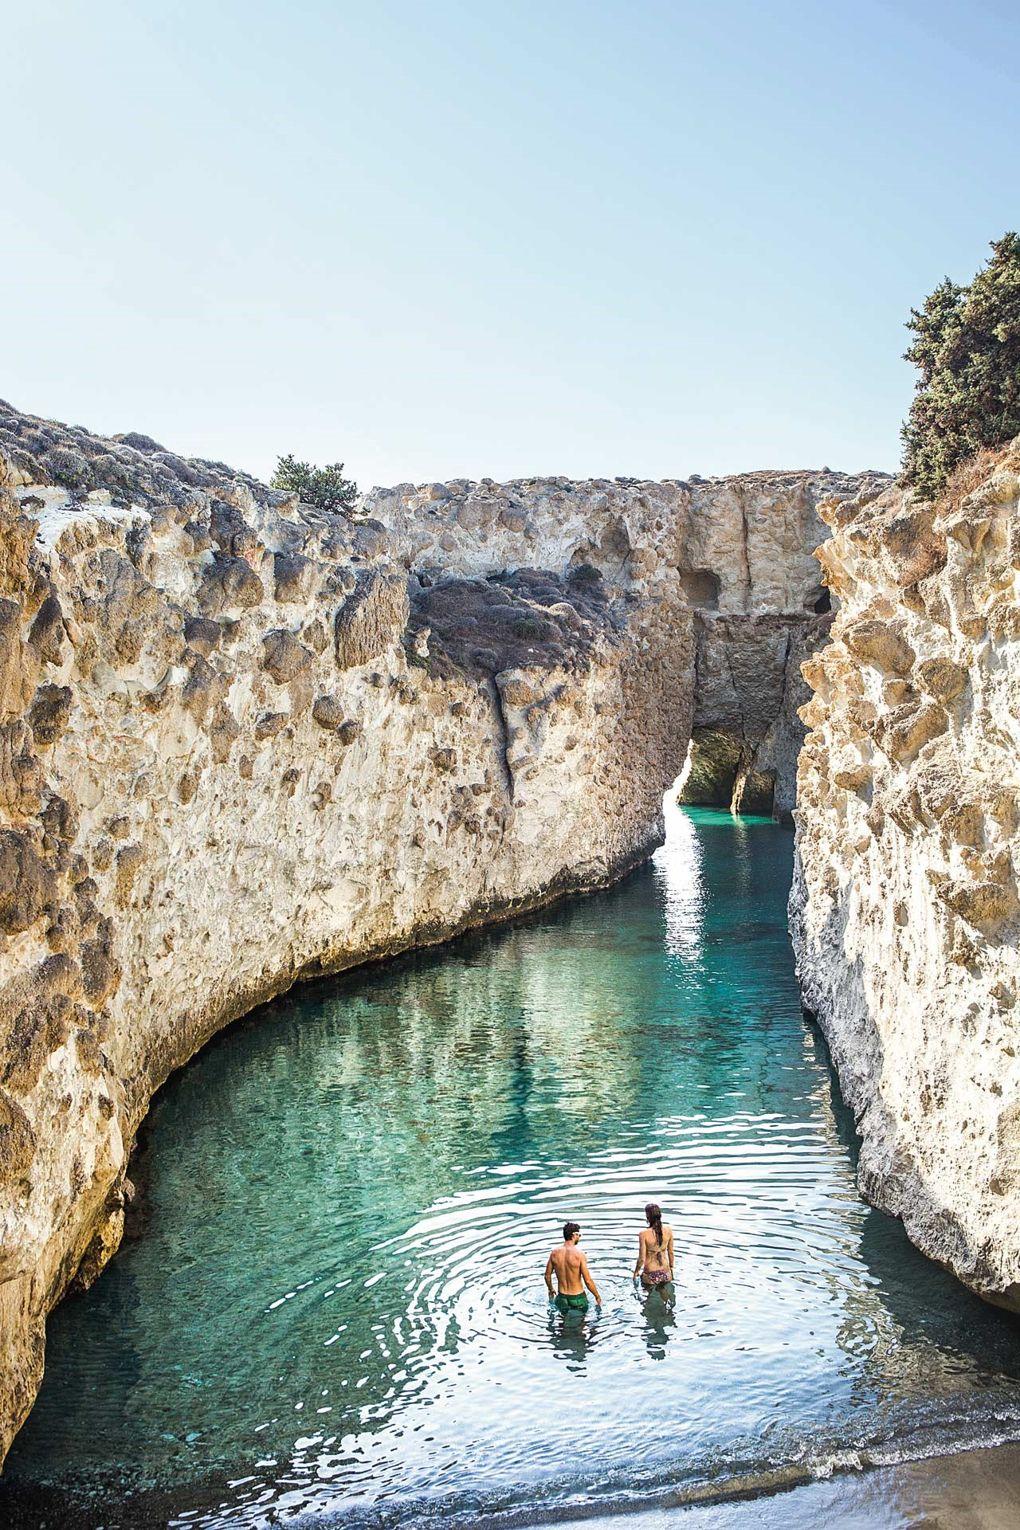 The area of Kleftiko 
for a swim at its 
jaw-dropping sea caves,